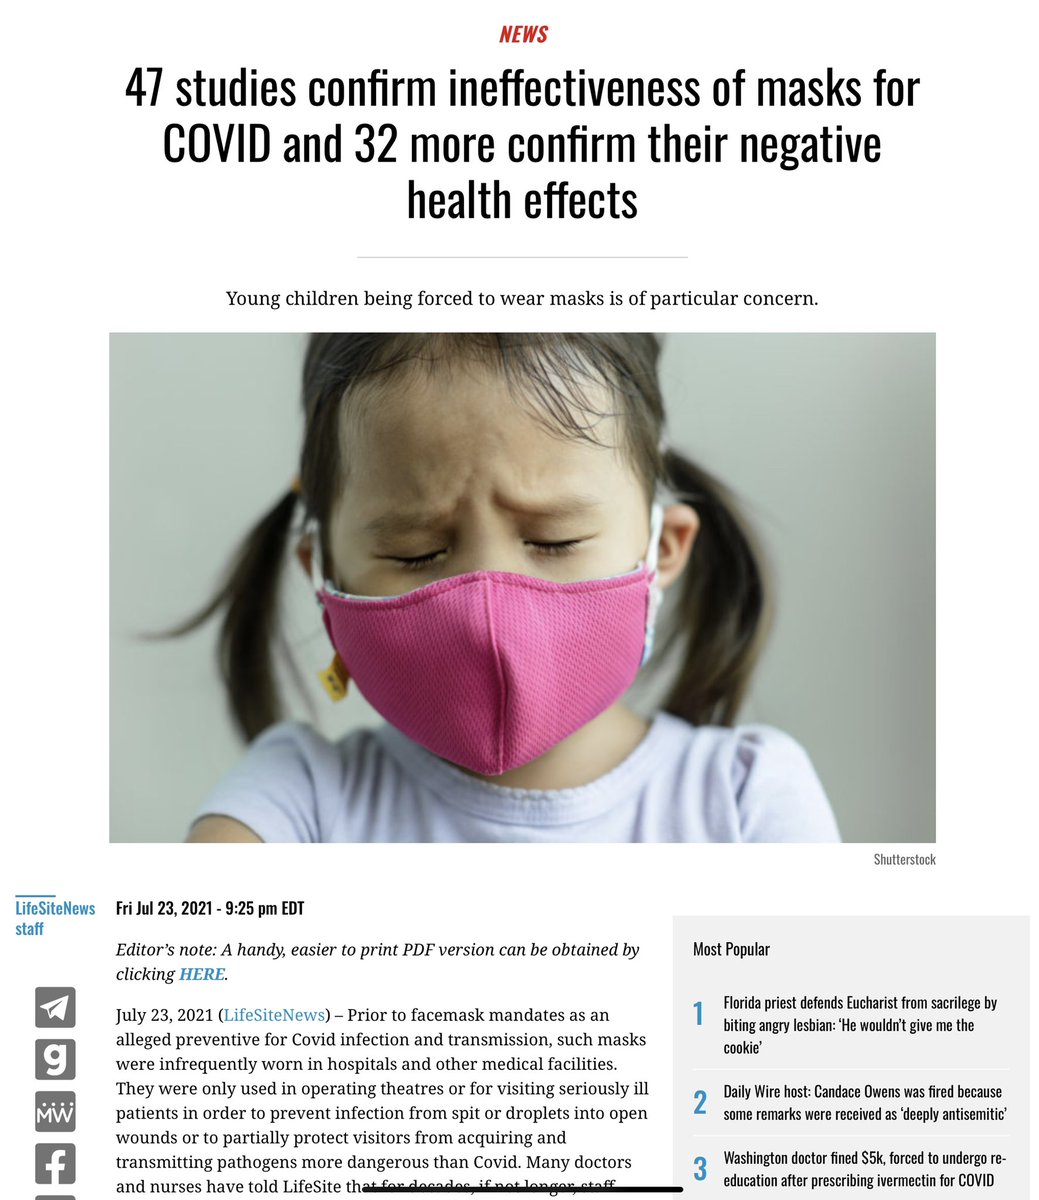 2/2 47 studies confirm ineffectiveness of masks for COVID and 32 more confirm their negative health effects lifesitenews.com/news/47-studie…